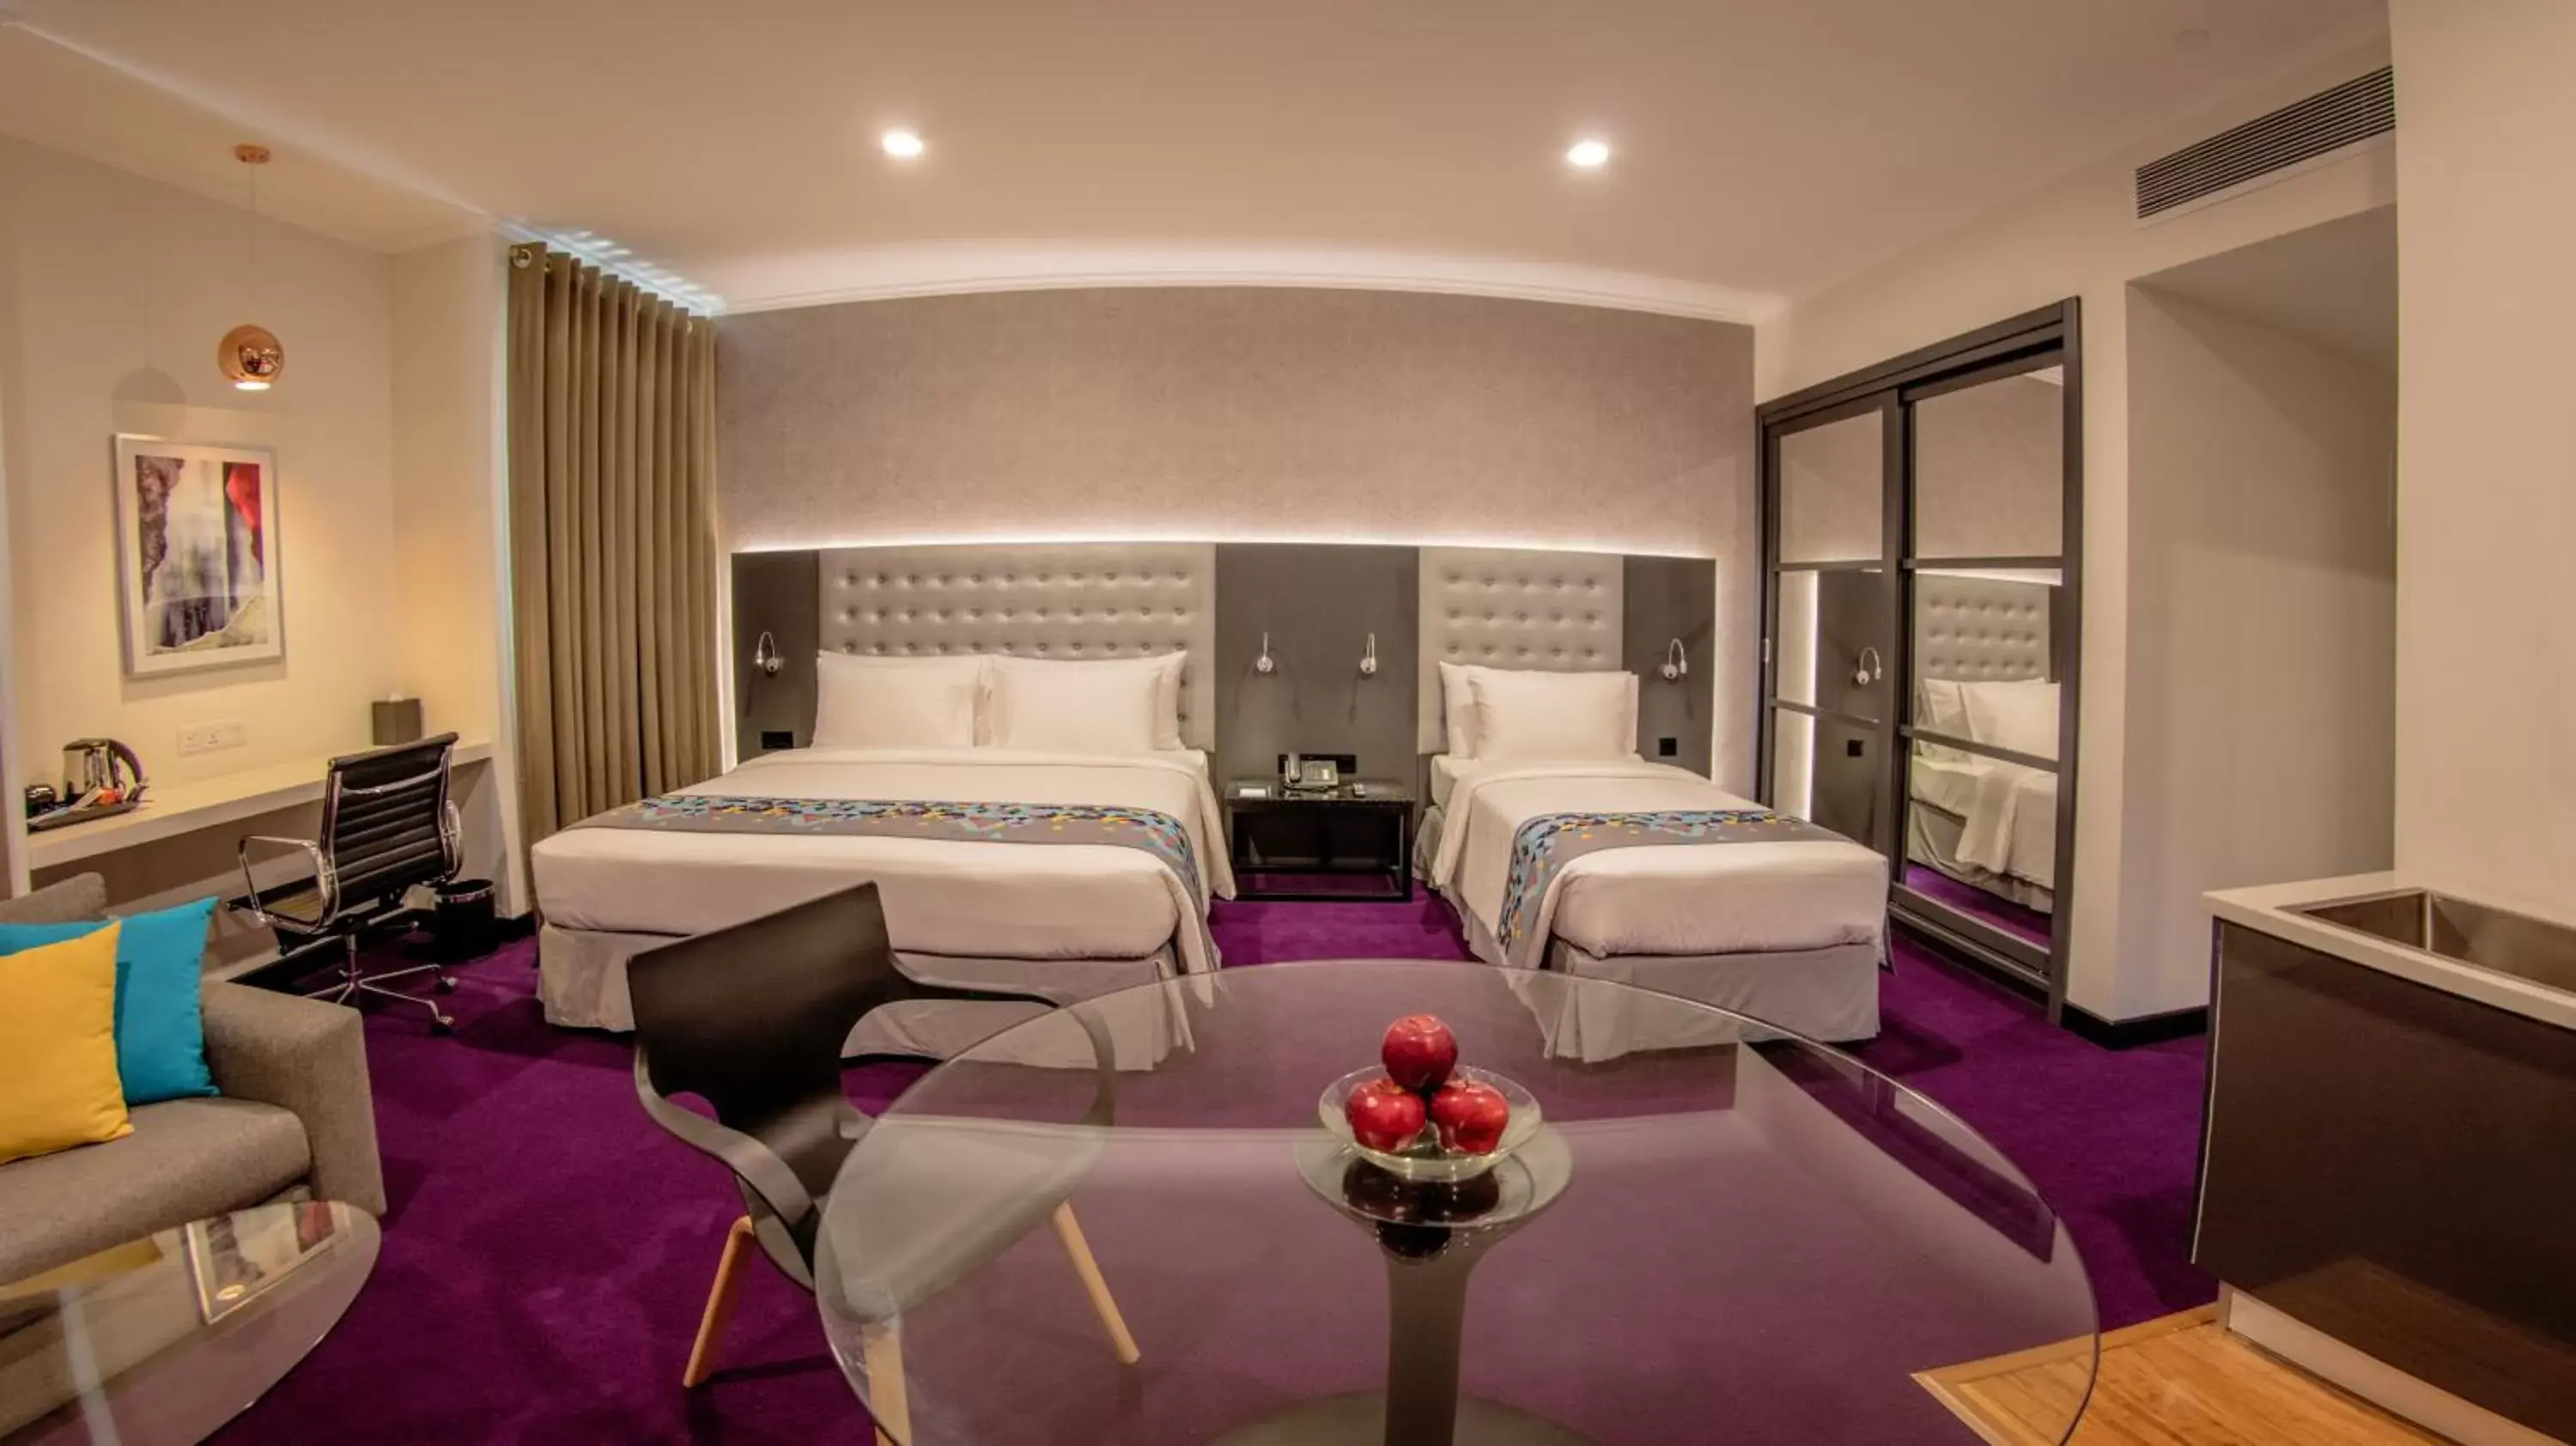 Bed, Room Photo in Fairway Colombo